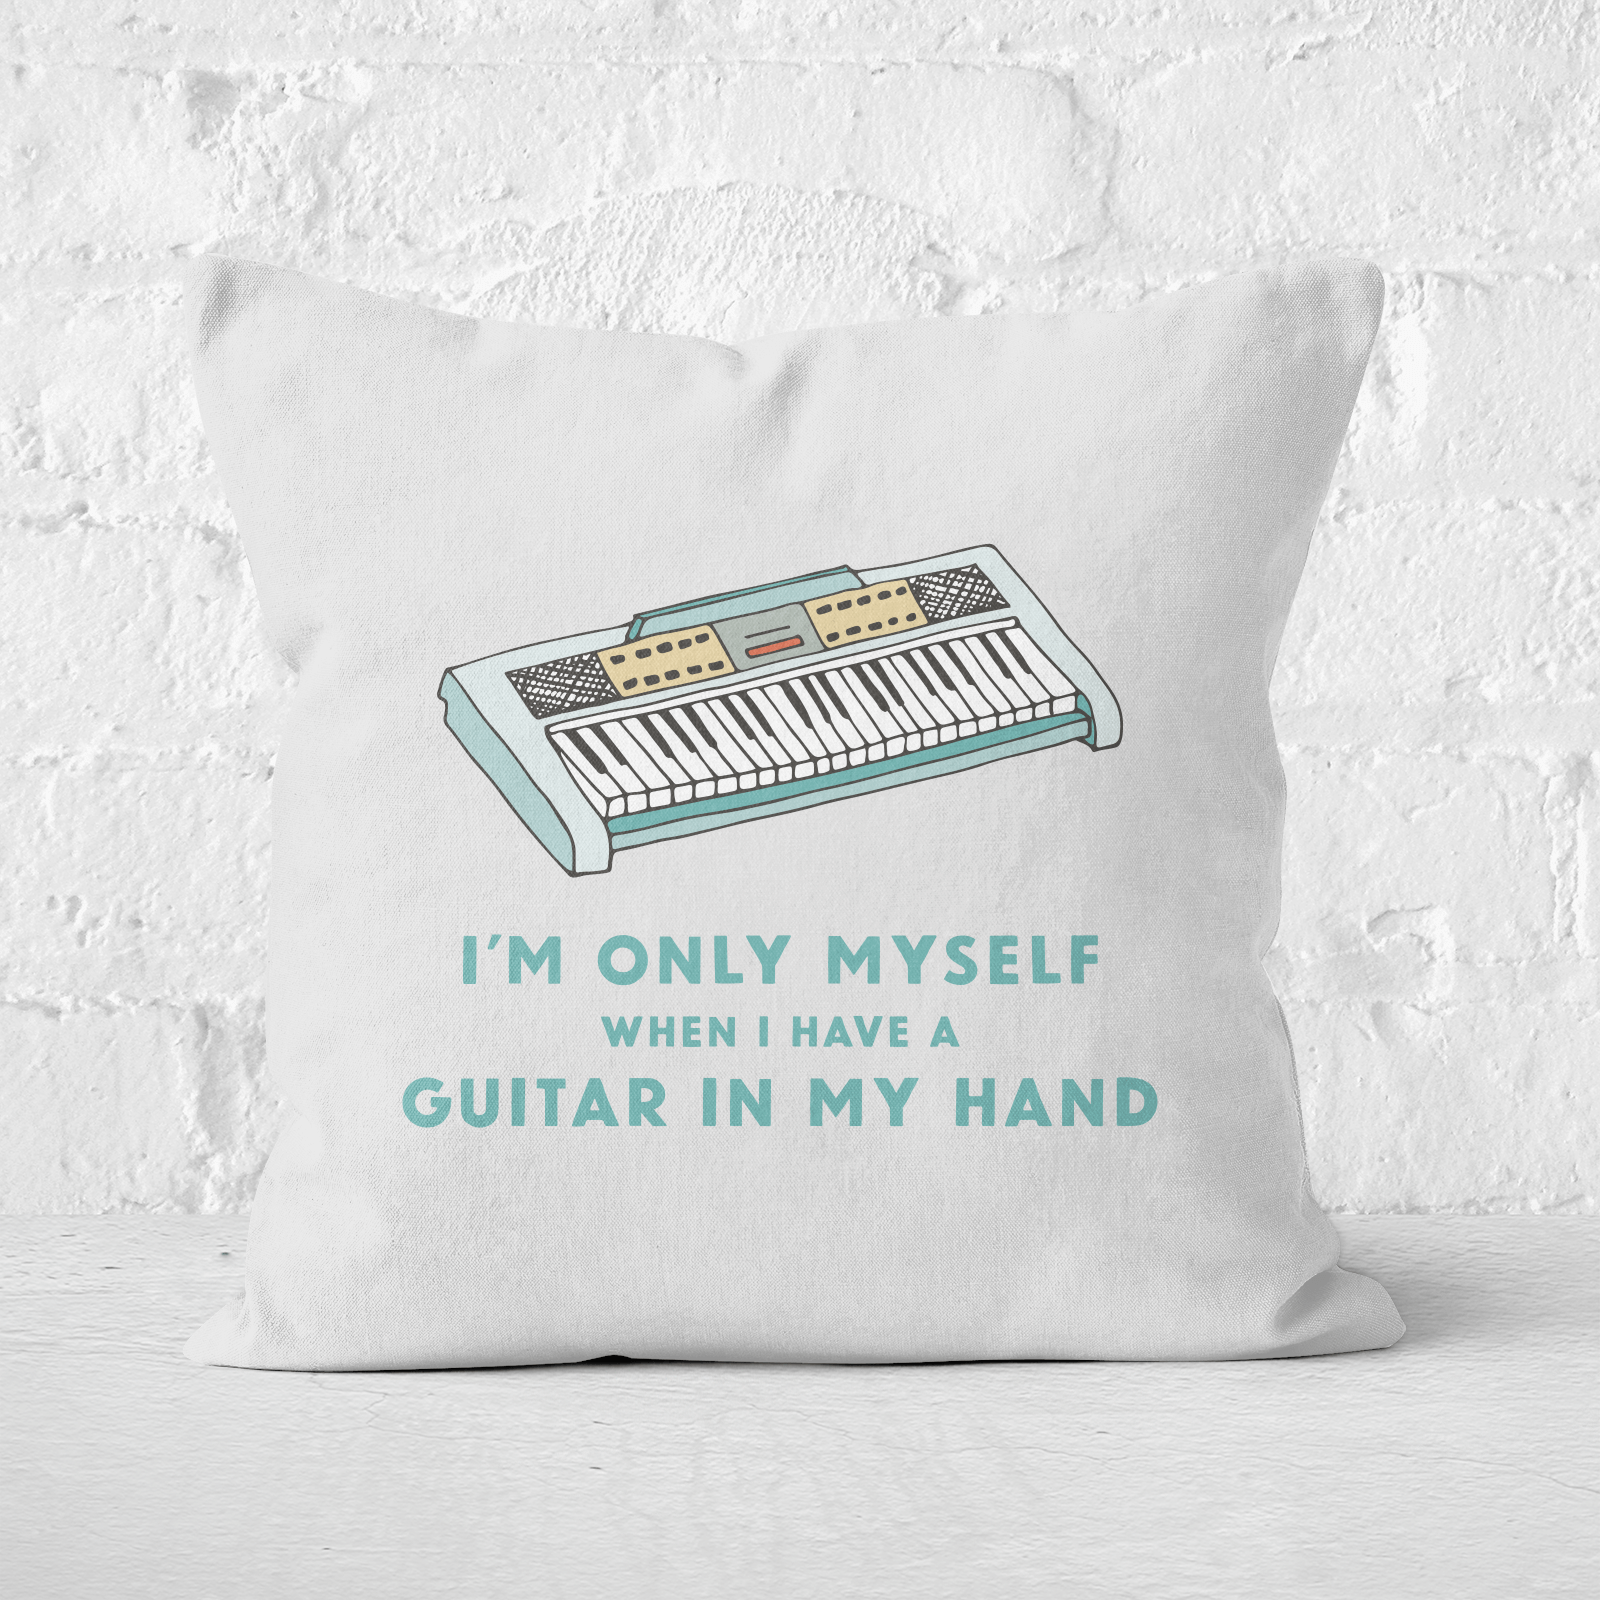 I'm Only Myself When I Have A Keyboard In My Hand Square Cushion - 60x60cm - Soft Touch